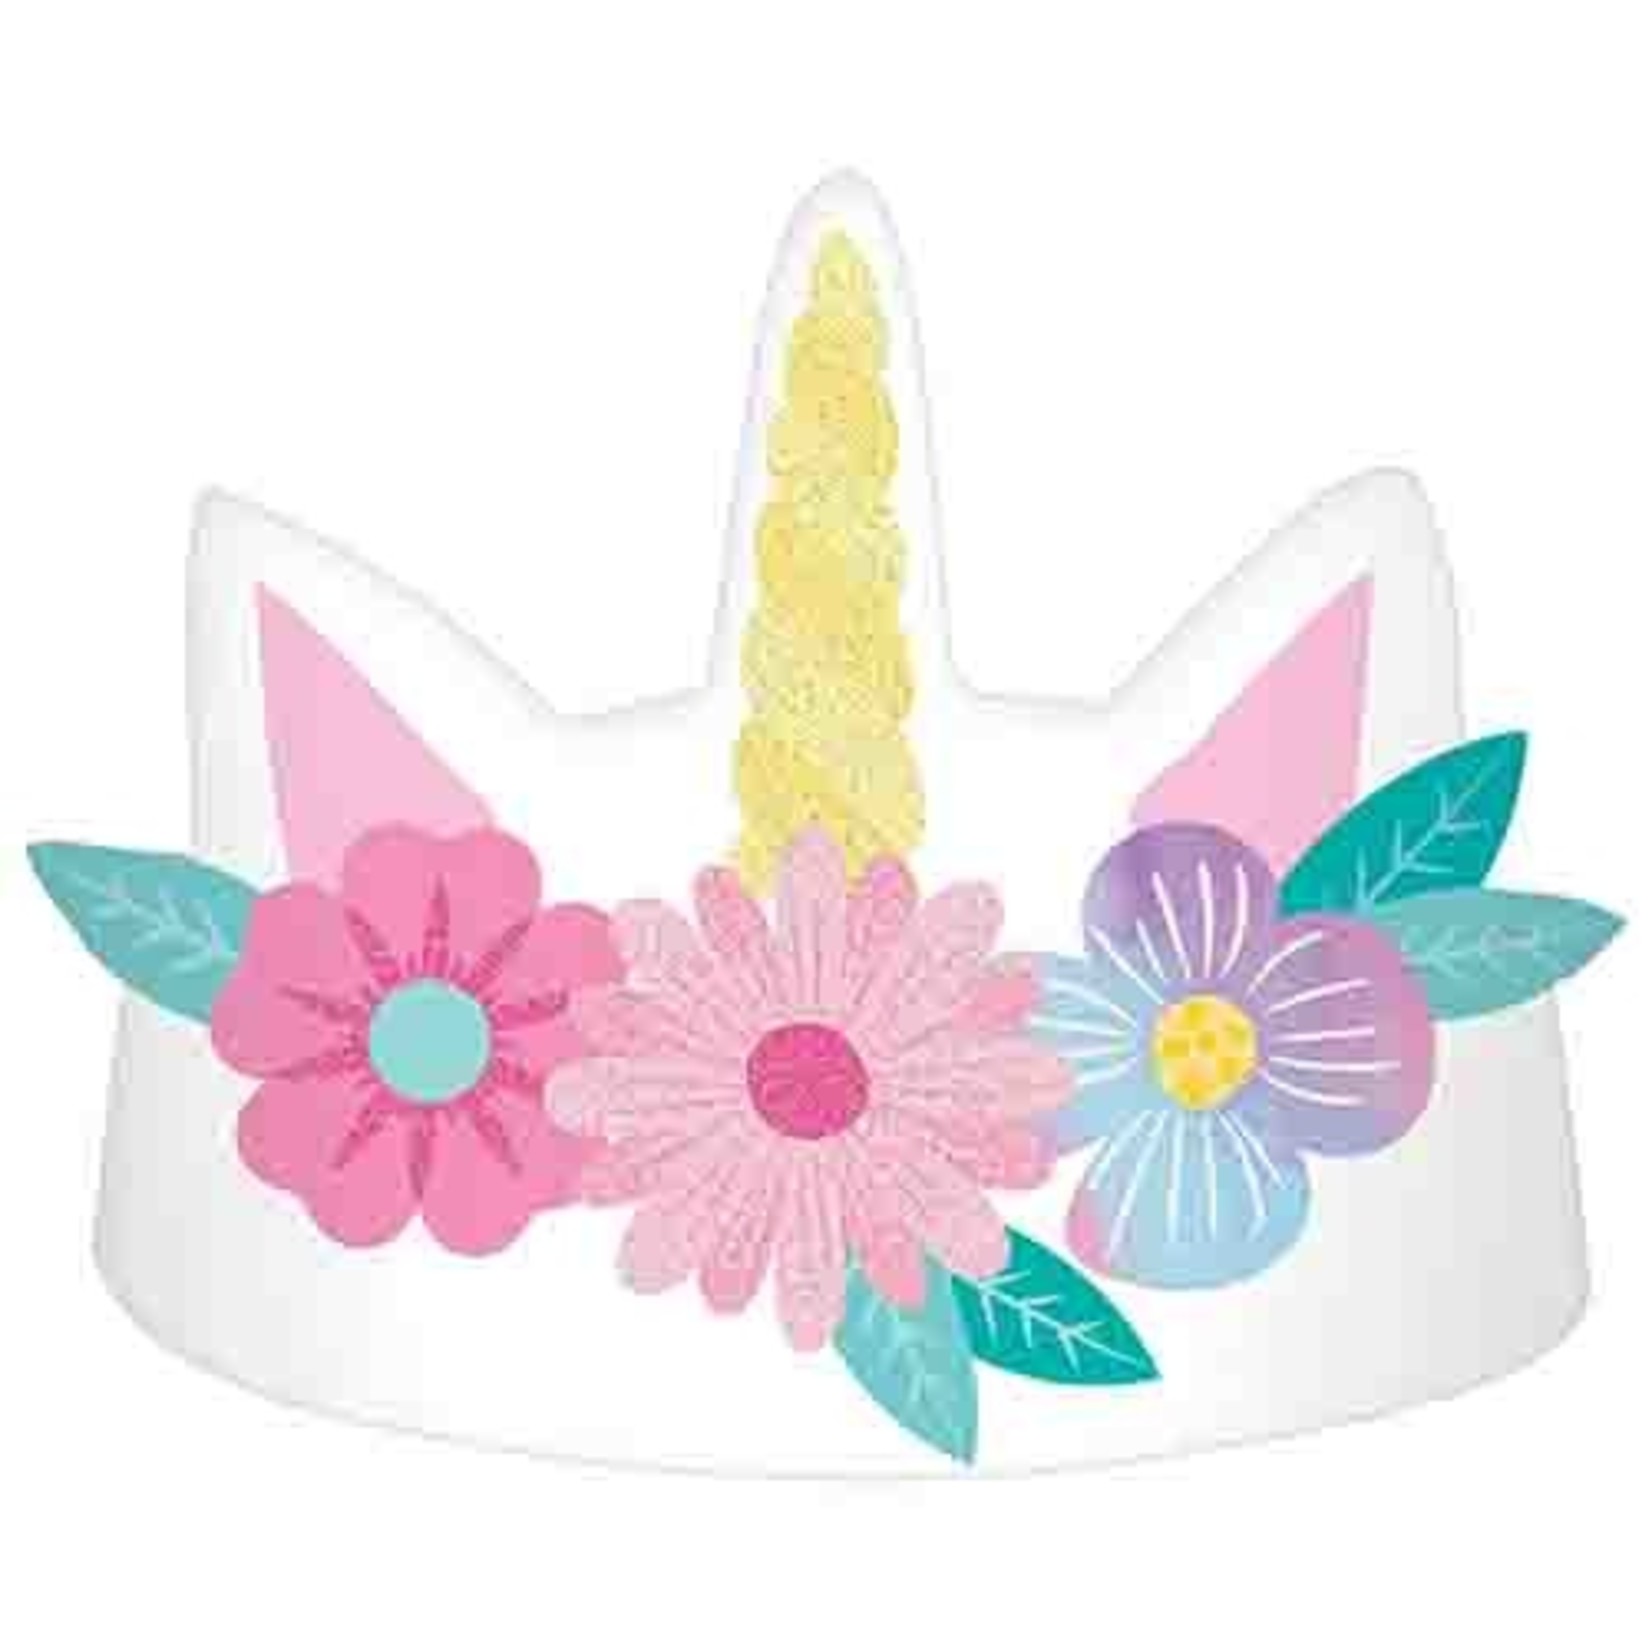 Amscan Enchanted Unicorn Paper Crowns - 8ct.